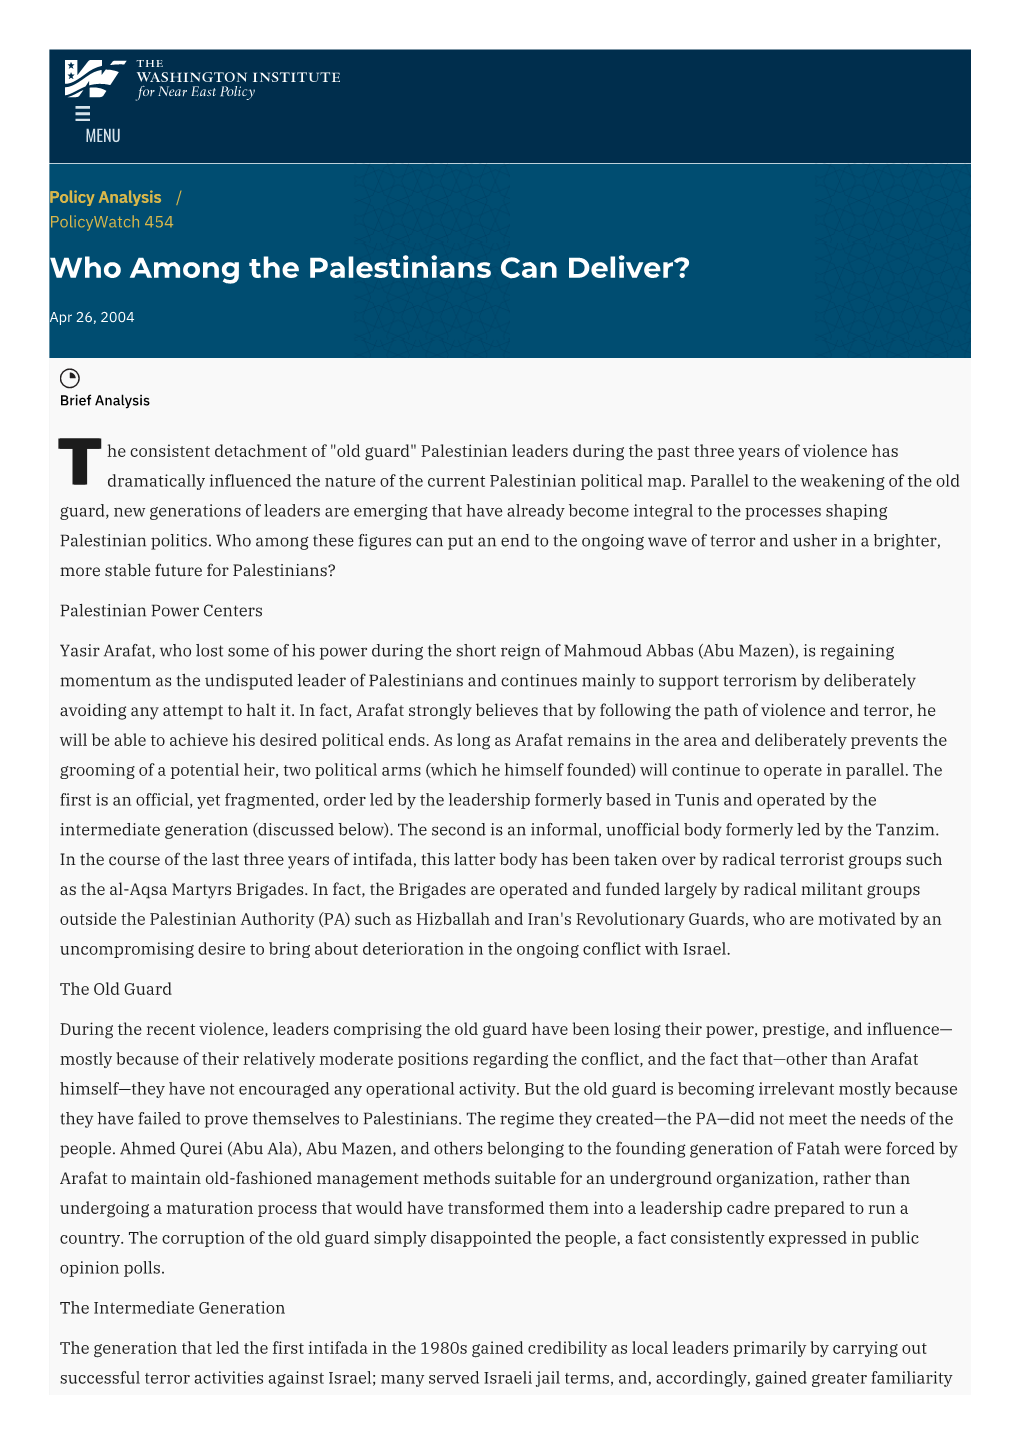 Who Among the Palestinians Can Deliver? | the Washington Institute